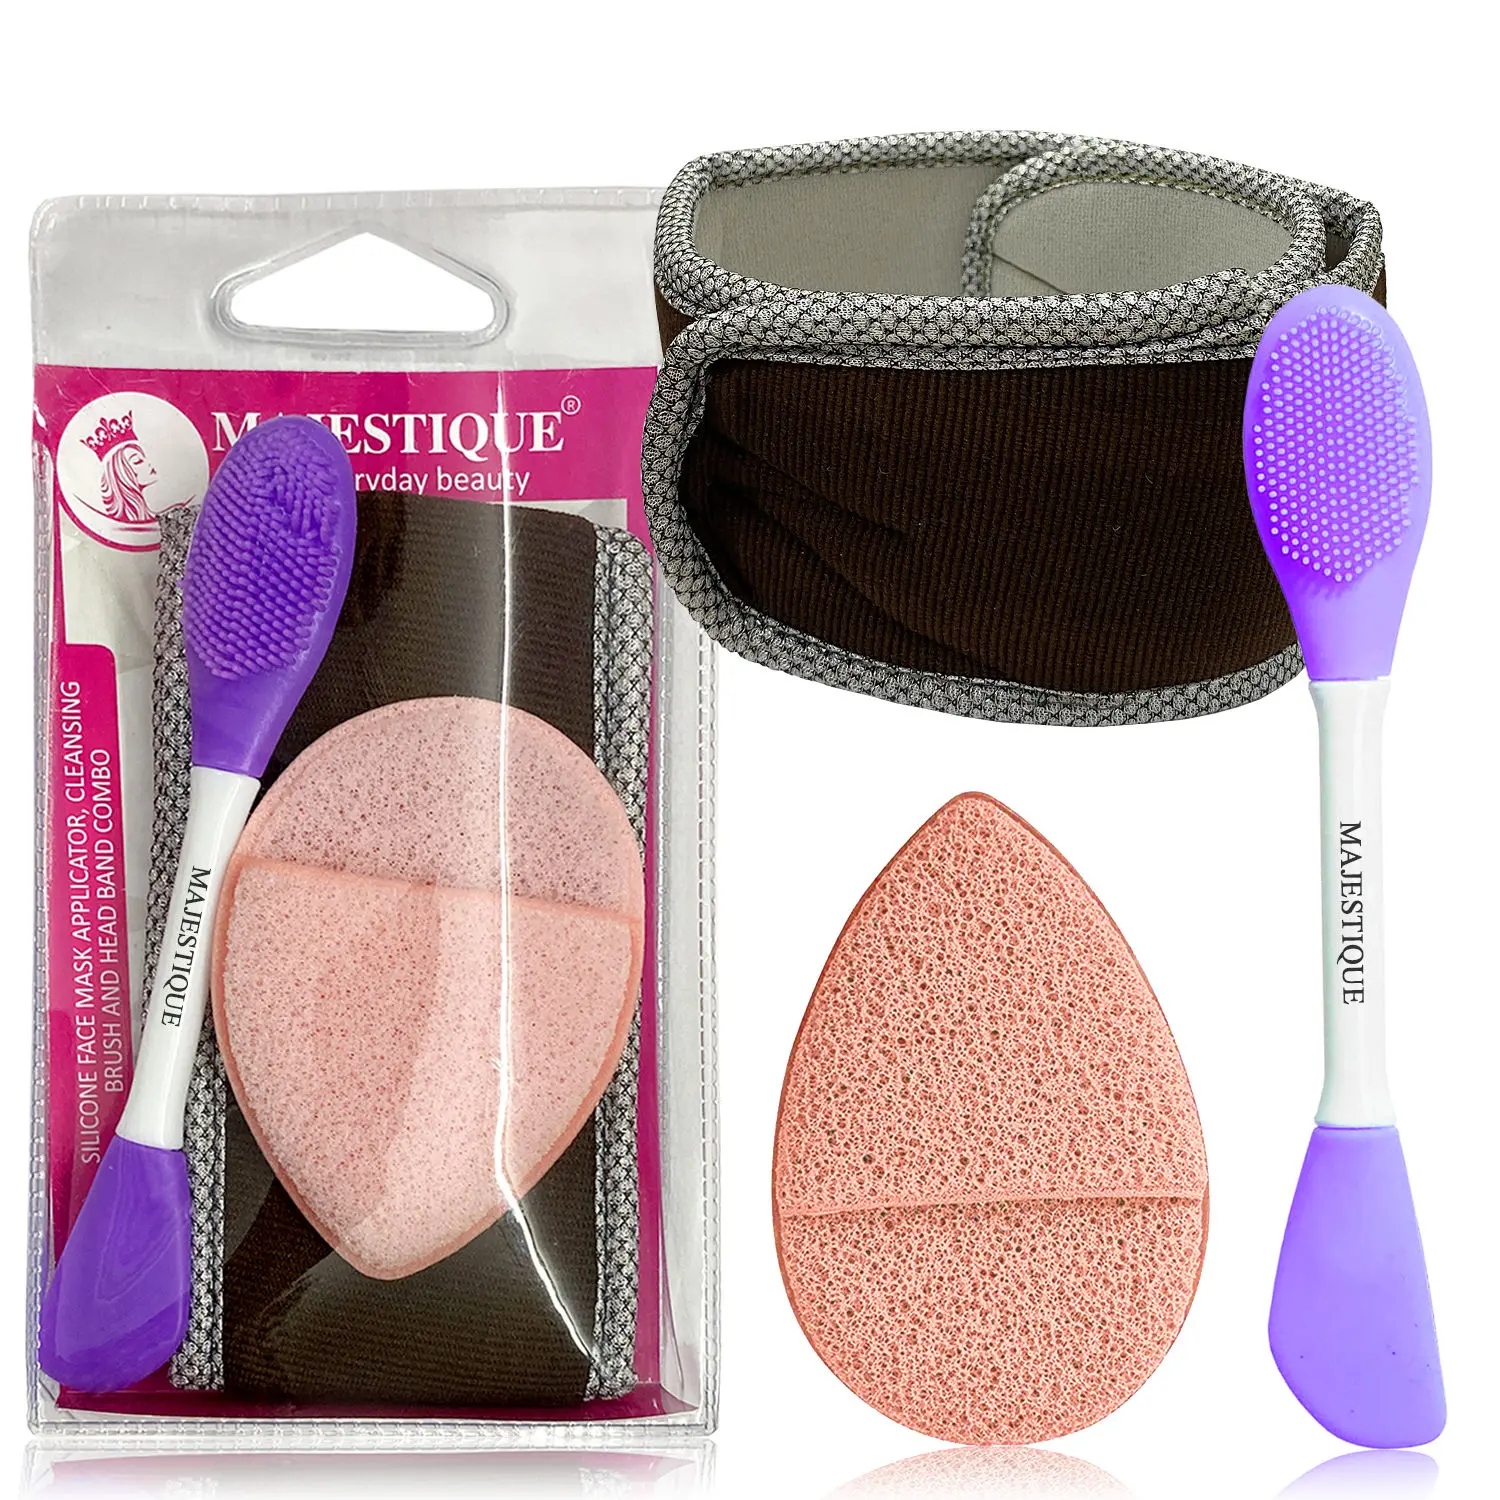 Majestique Facial Head Band, Dual Sided Silicone Brush with Makeup Remover Sponge - Color May Vary